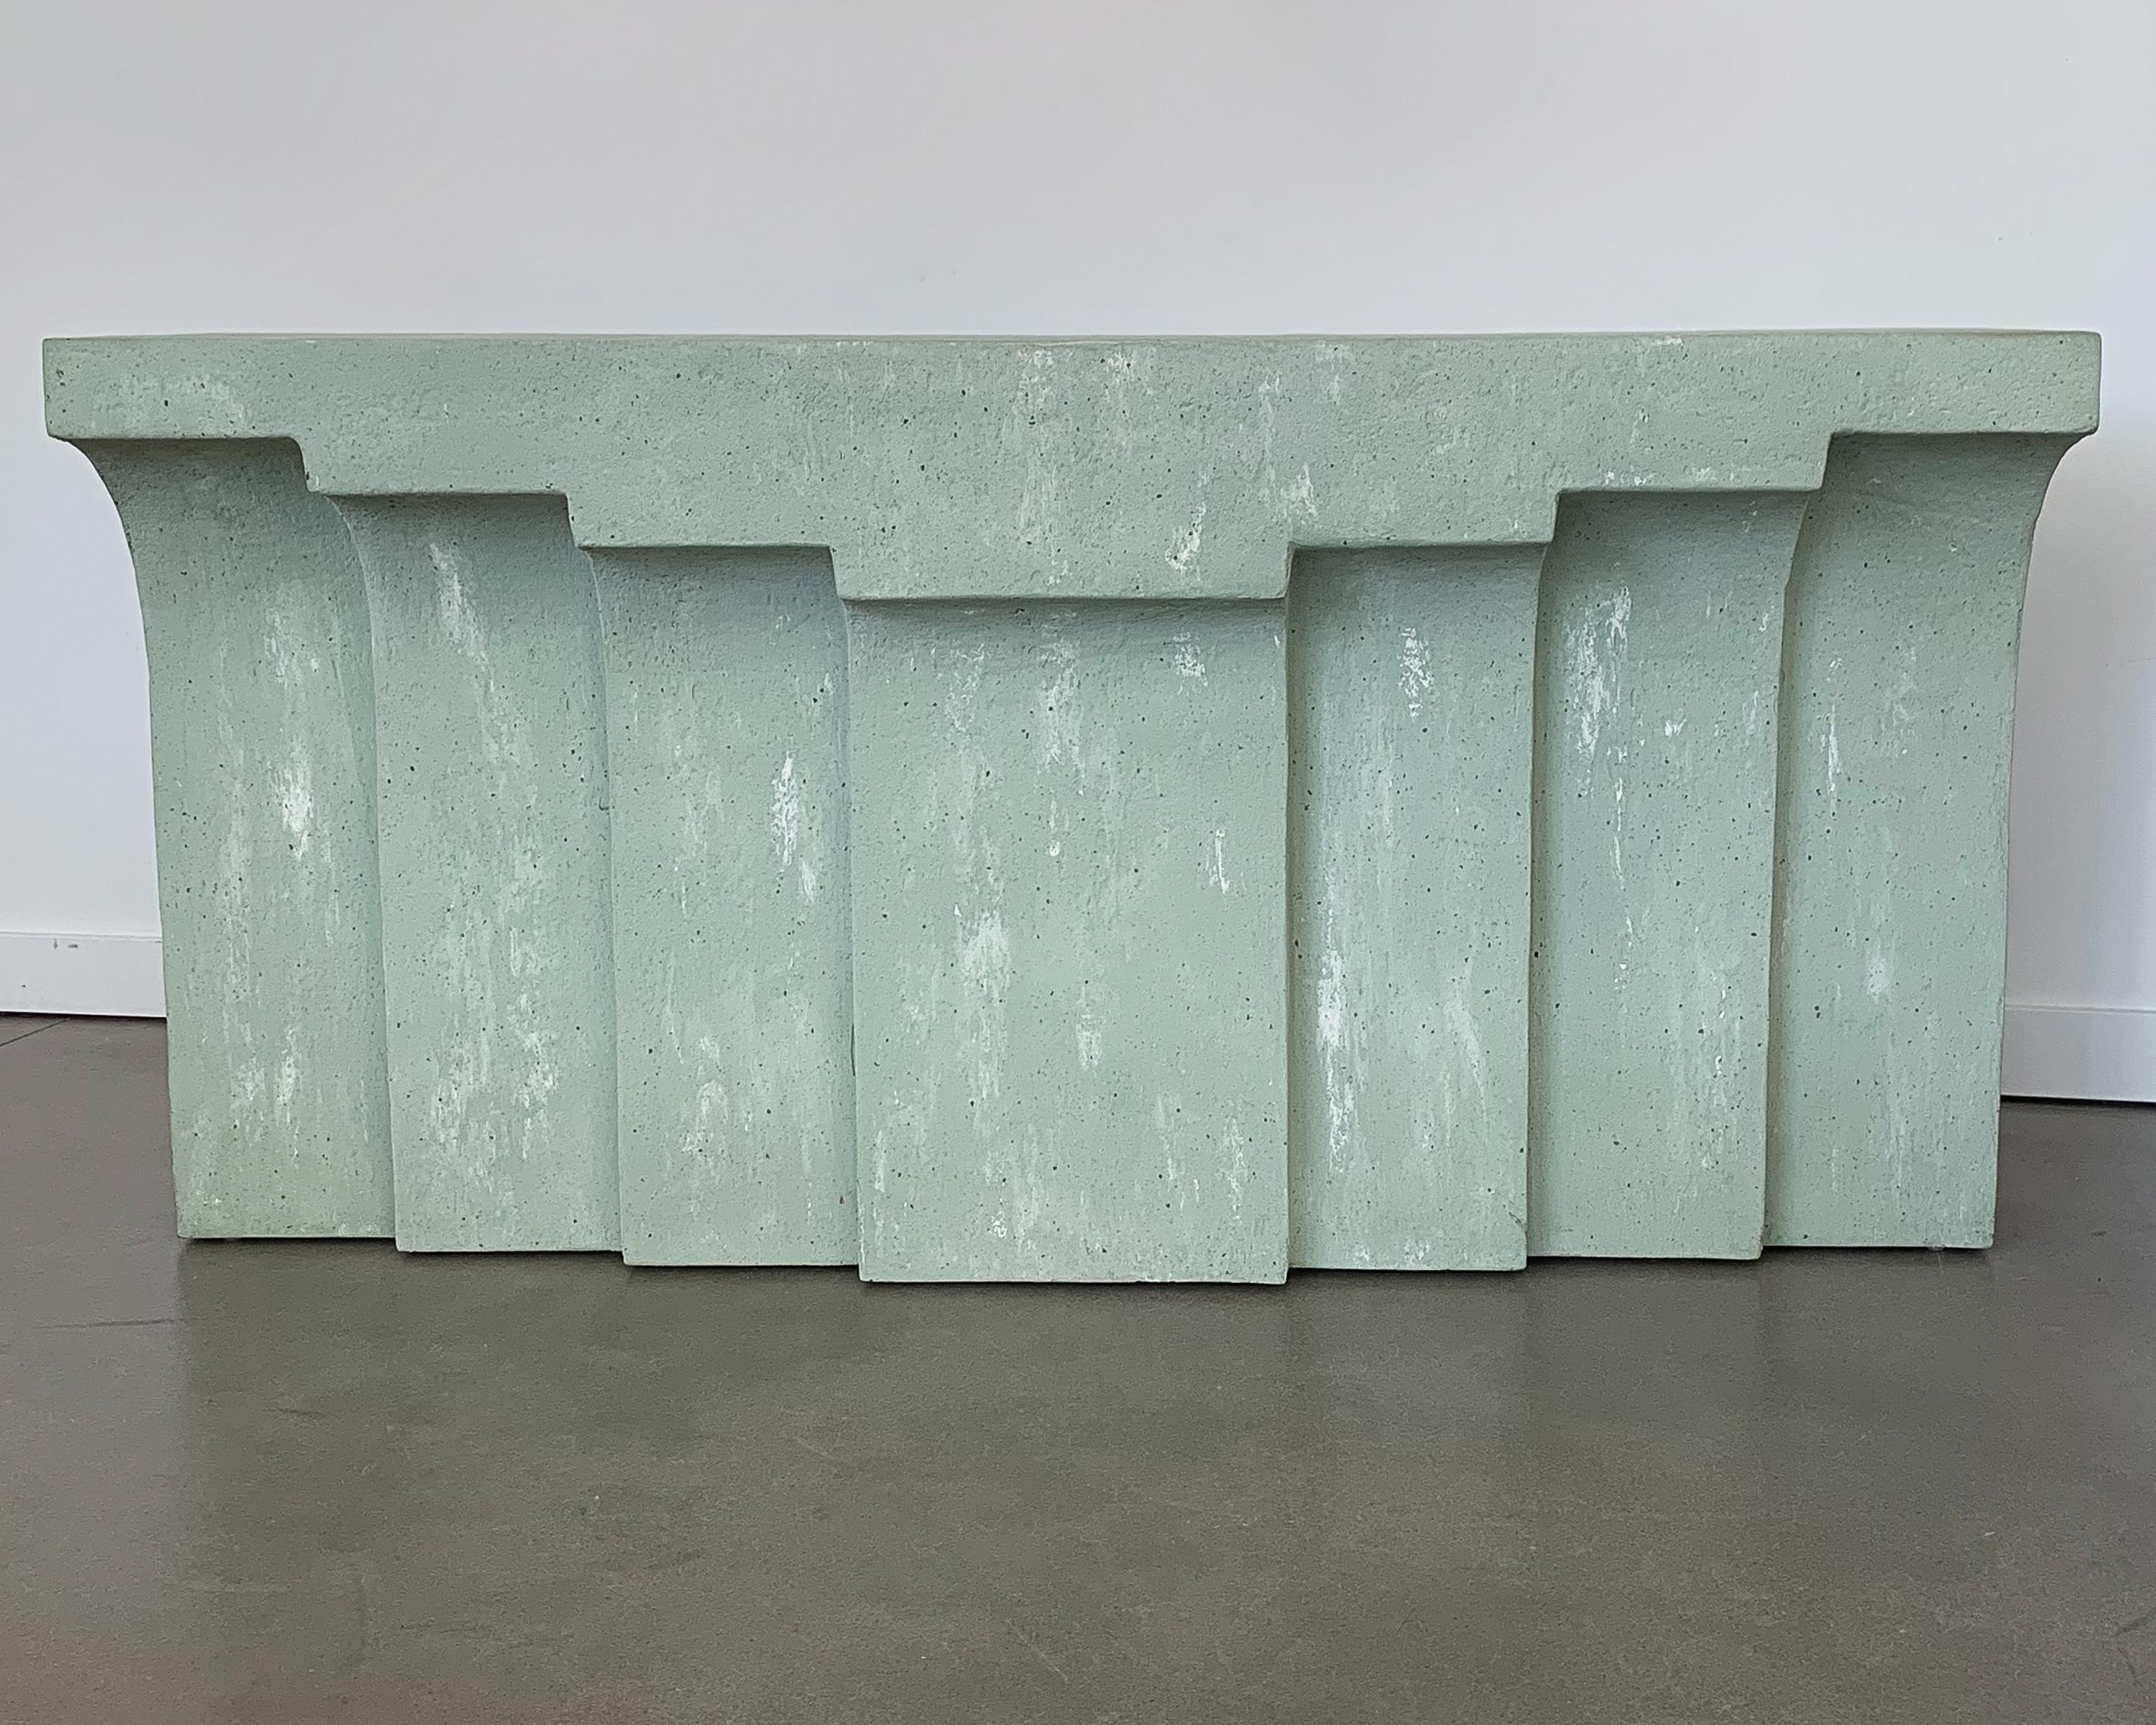 Unique modernist faux concrete or plaster console table in a pale sea foam green color. Fiberglass construction with textured surface to resemble cast concrete or plaster. Stepped modern arched design. Finished on all sides and washed with white to